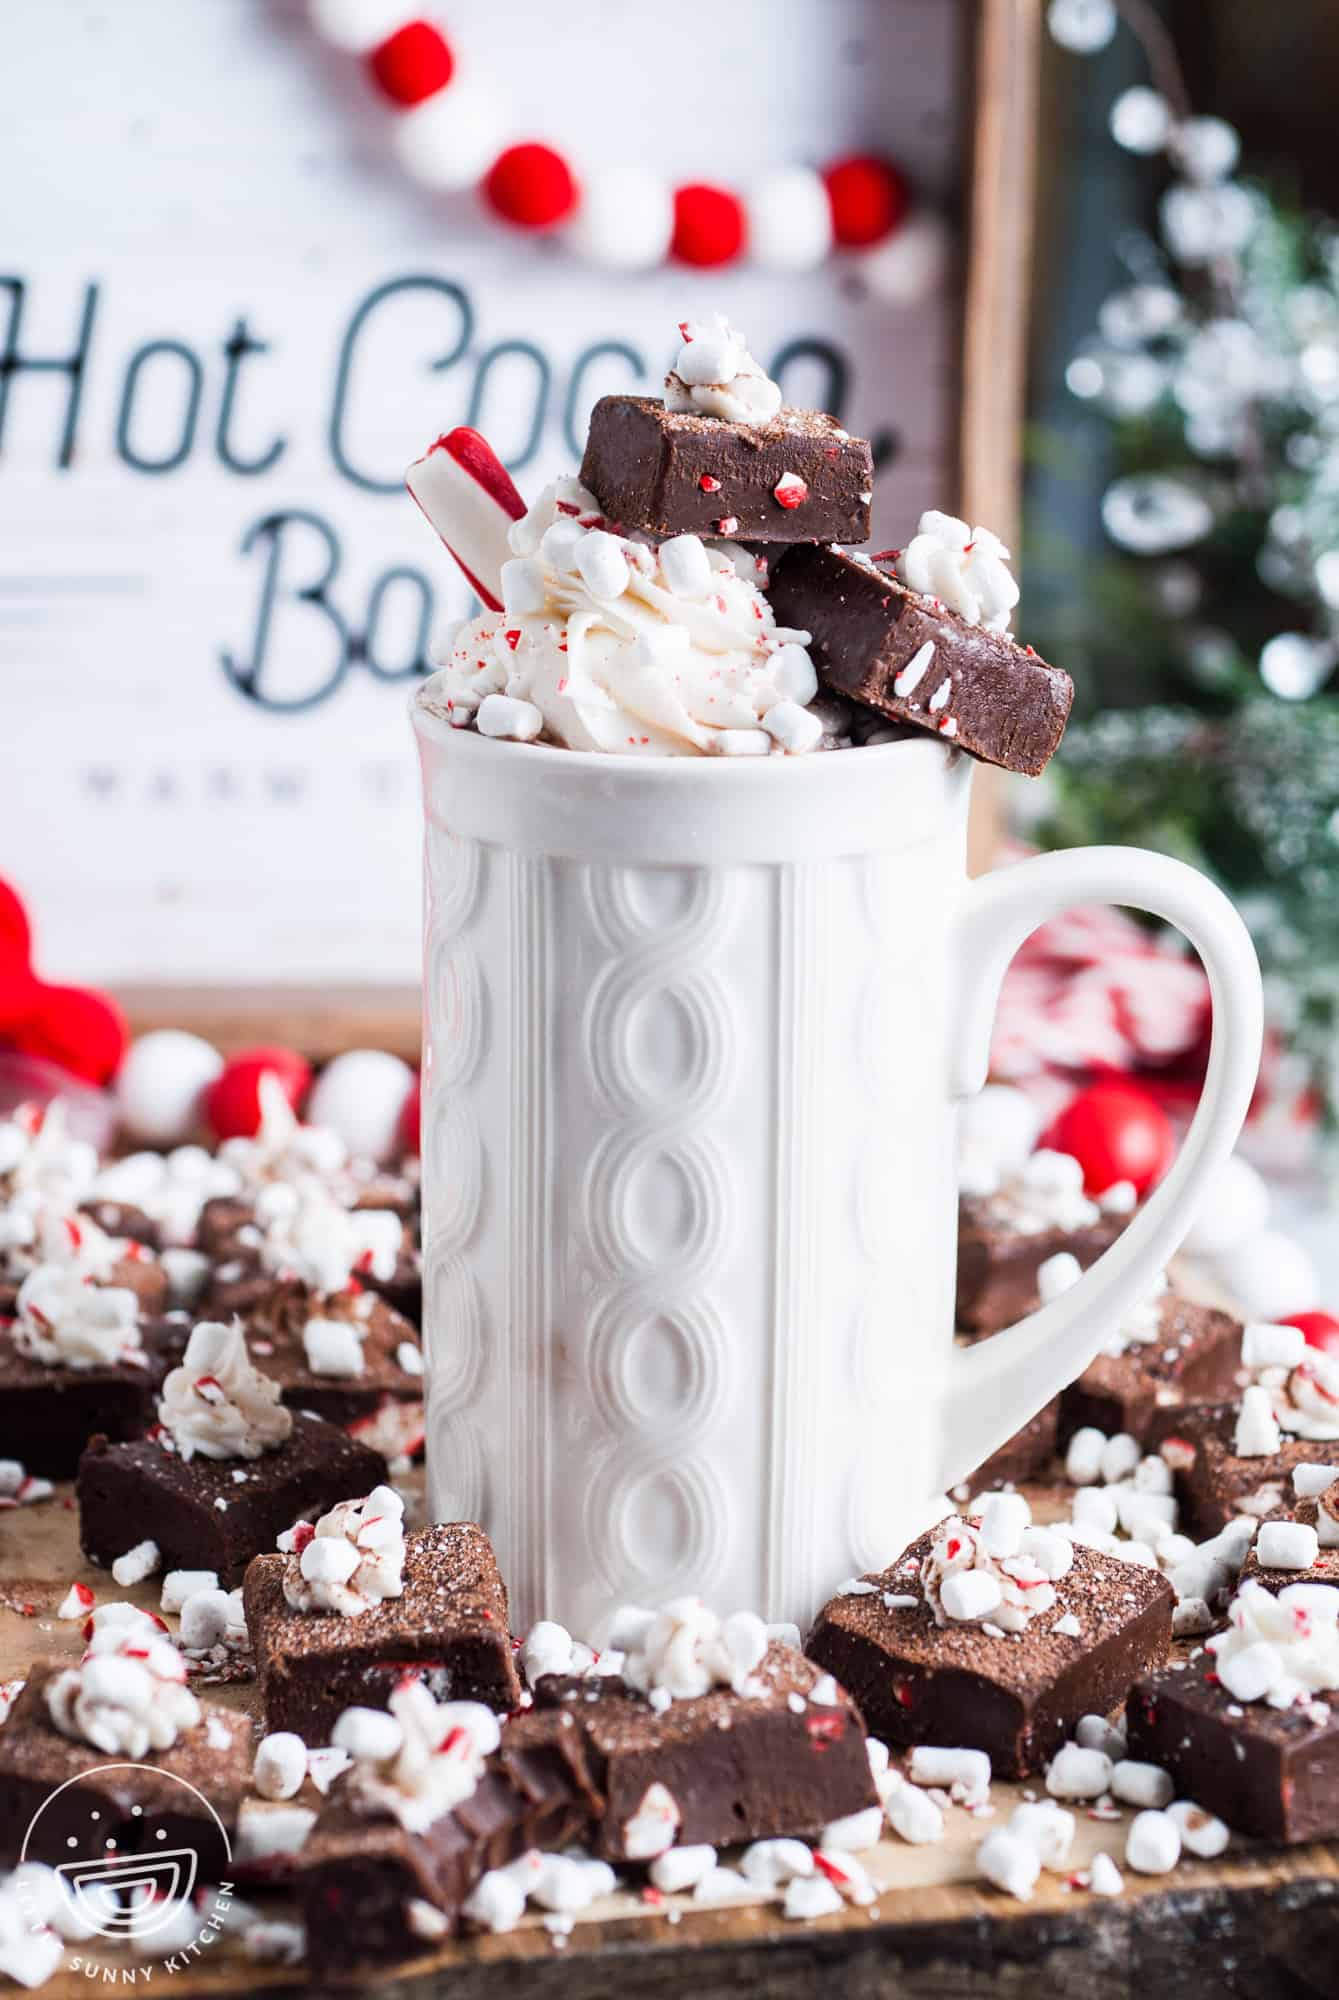 a white ceramic mug topped with whipped cream and two pieces of peppermint hot chocolate fudge. a sign in the background says "hot cocoa bar"